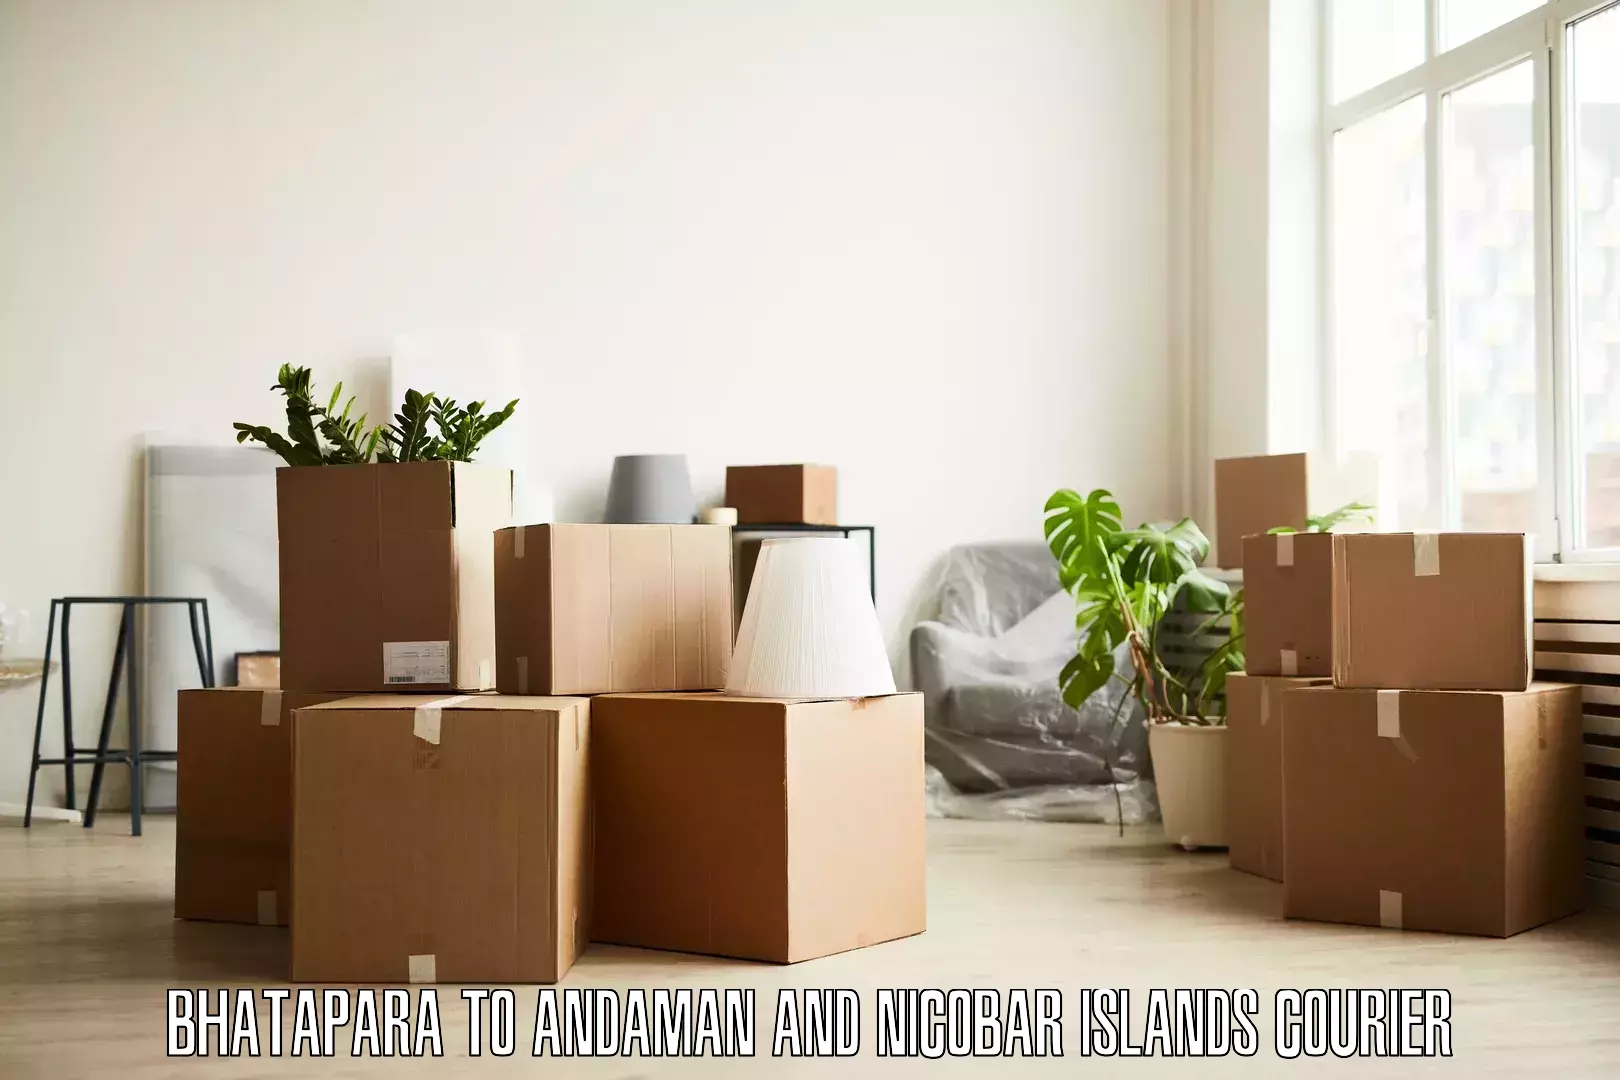 Trusted relocation experts Bhatapara to Nicobar